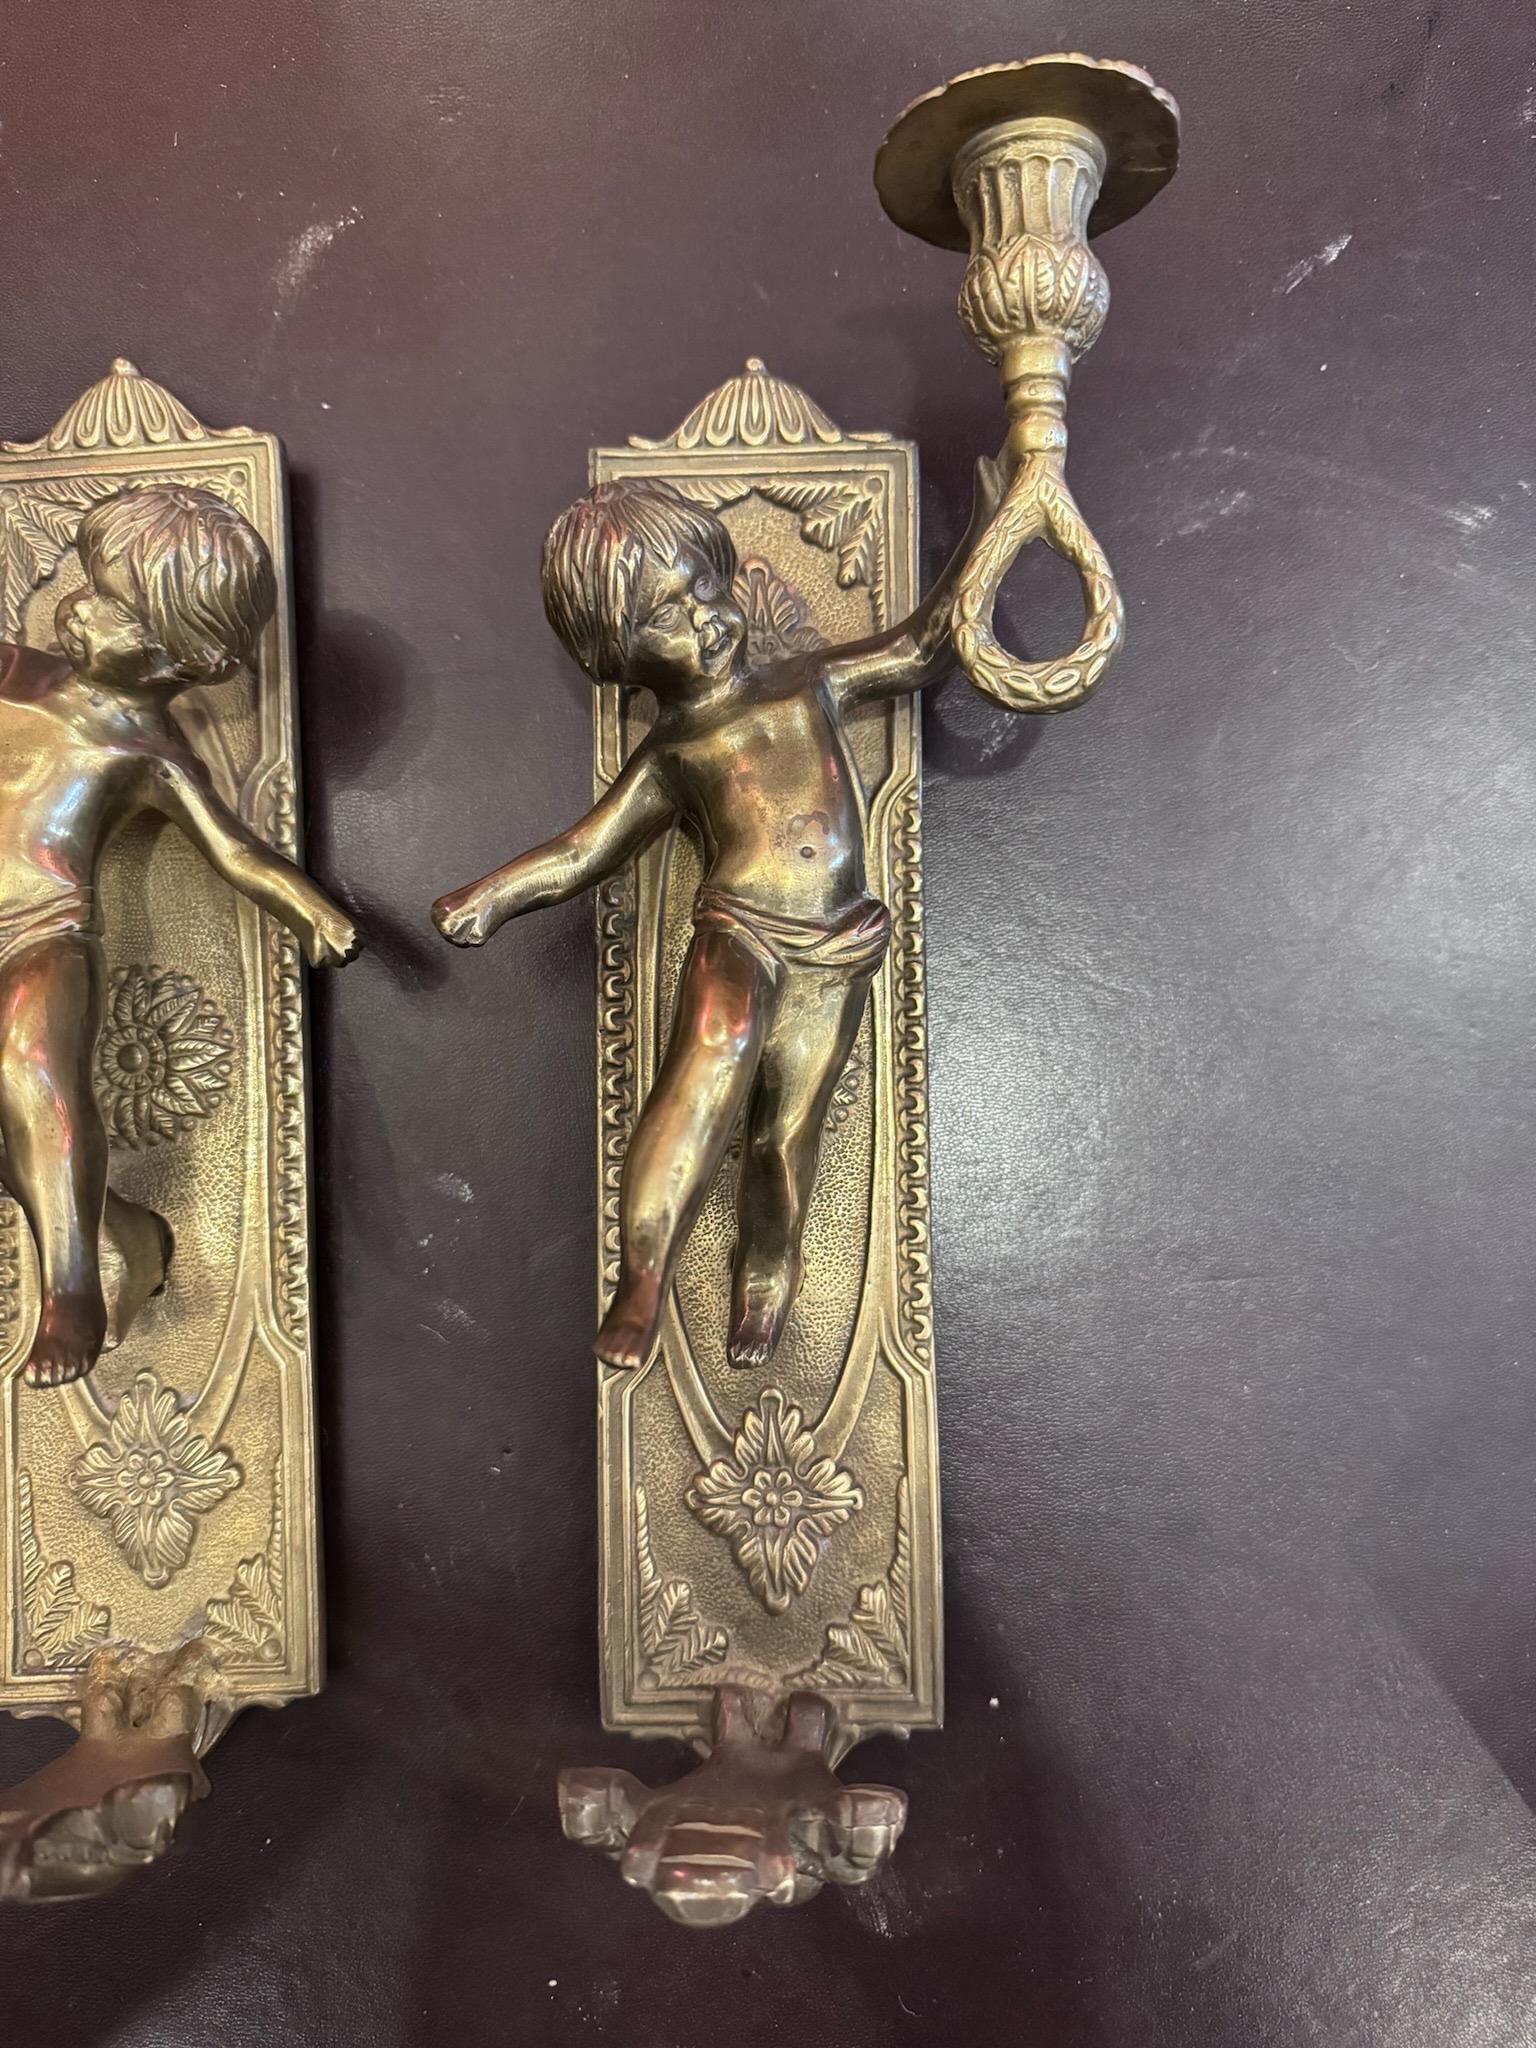 Vintage Brass Putti Cherub Angel Wall Mounted Sconces Candle Holders - Set of 2

These matching cherub wall sconces can hold small taper candles. The cherubs are mounted upon a rectangular background with flower and leaf patterns. Hang these sconces